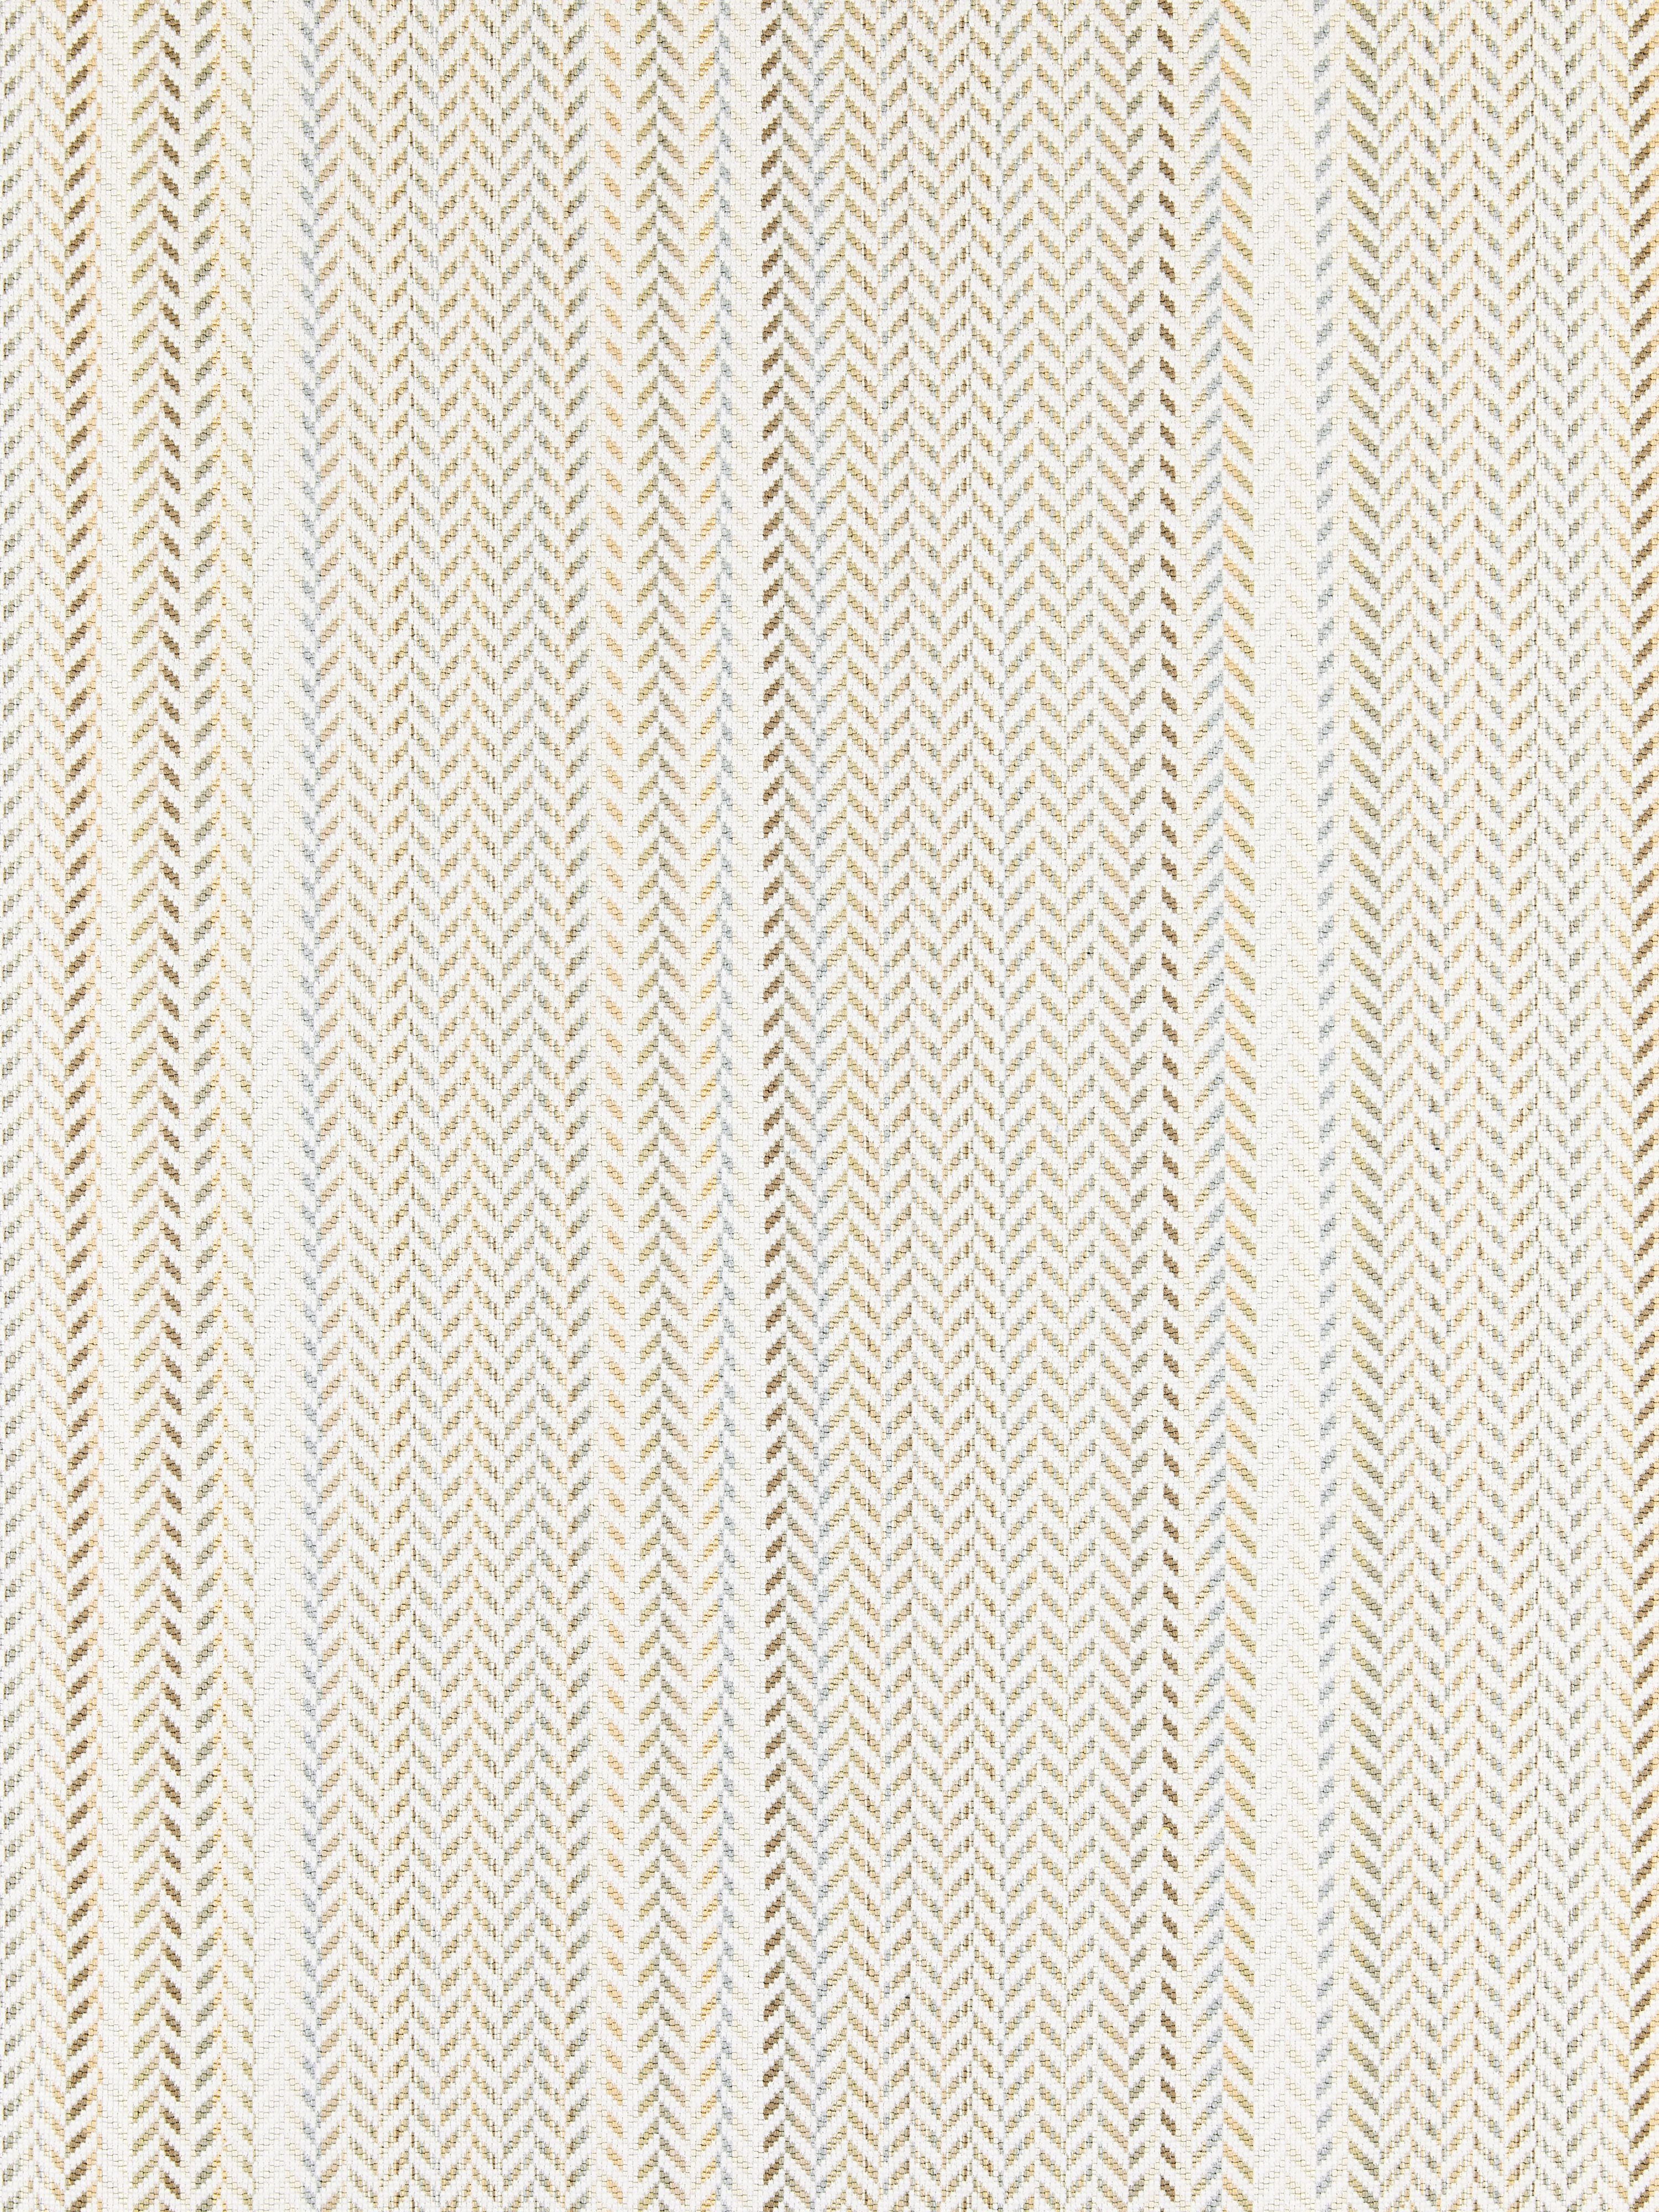 Arrow Stripe fabric in sand dune color - pattern number SC 000127254 - by Scalamandre in the Scalamandre Fabrics Book 1 collection